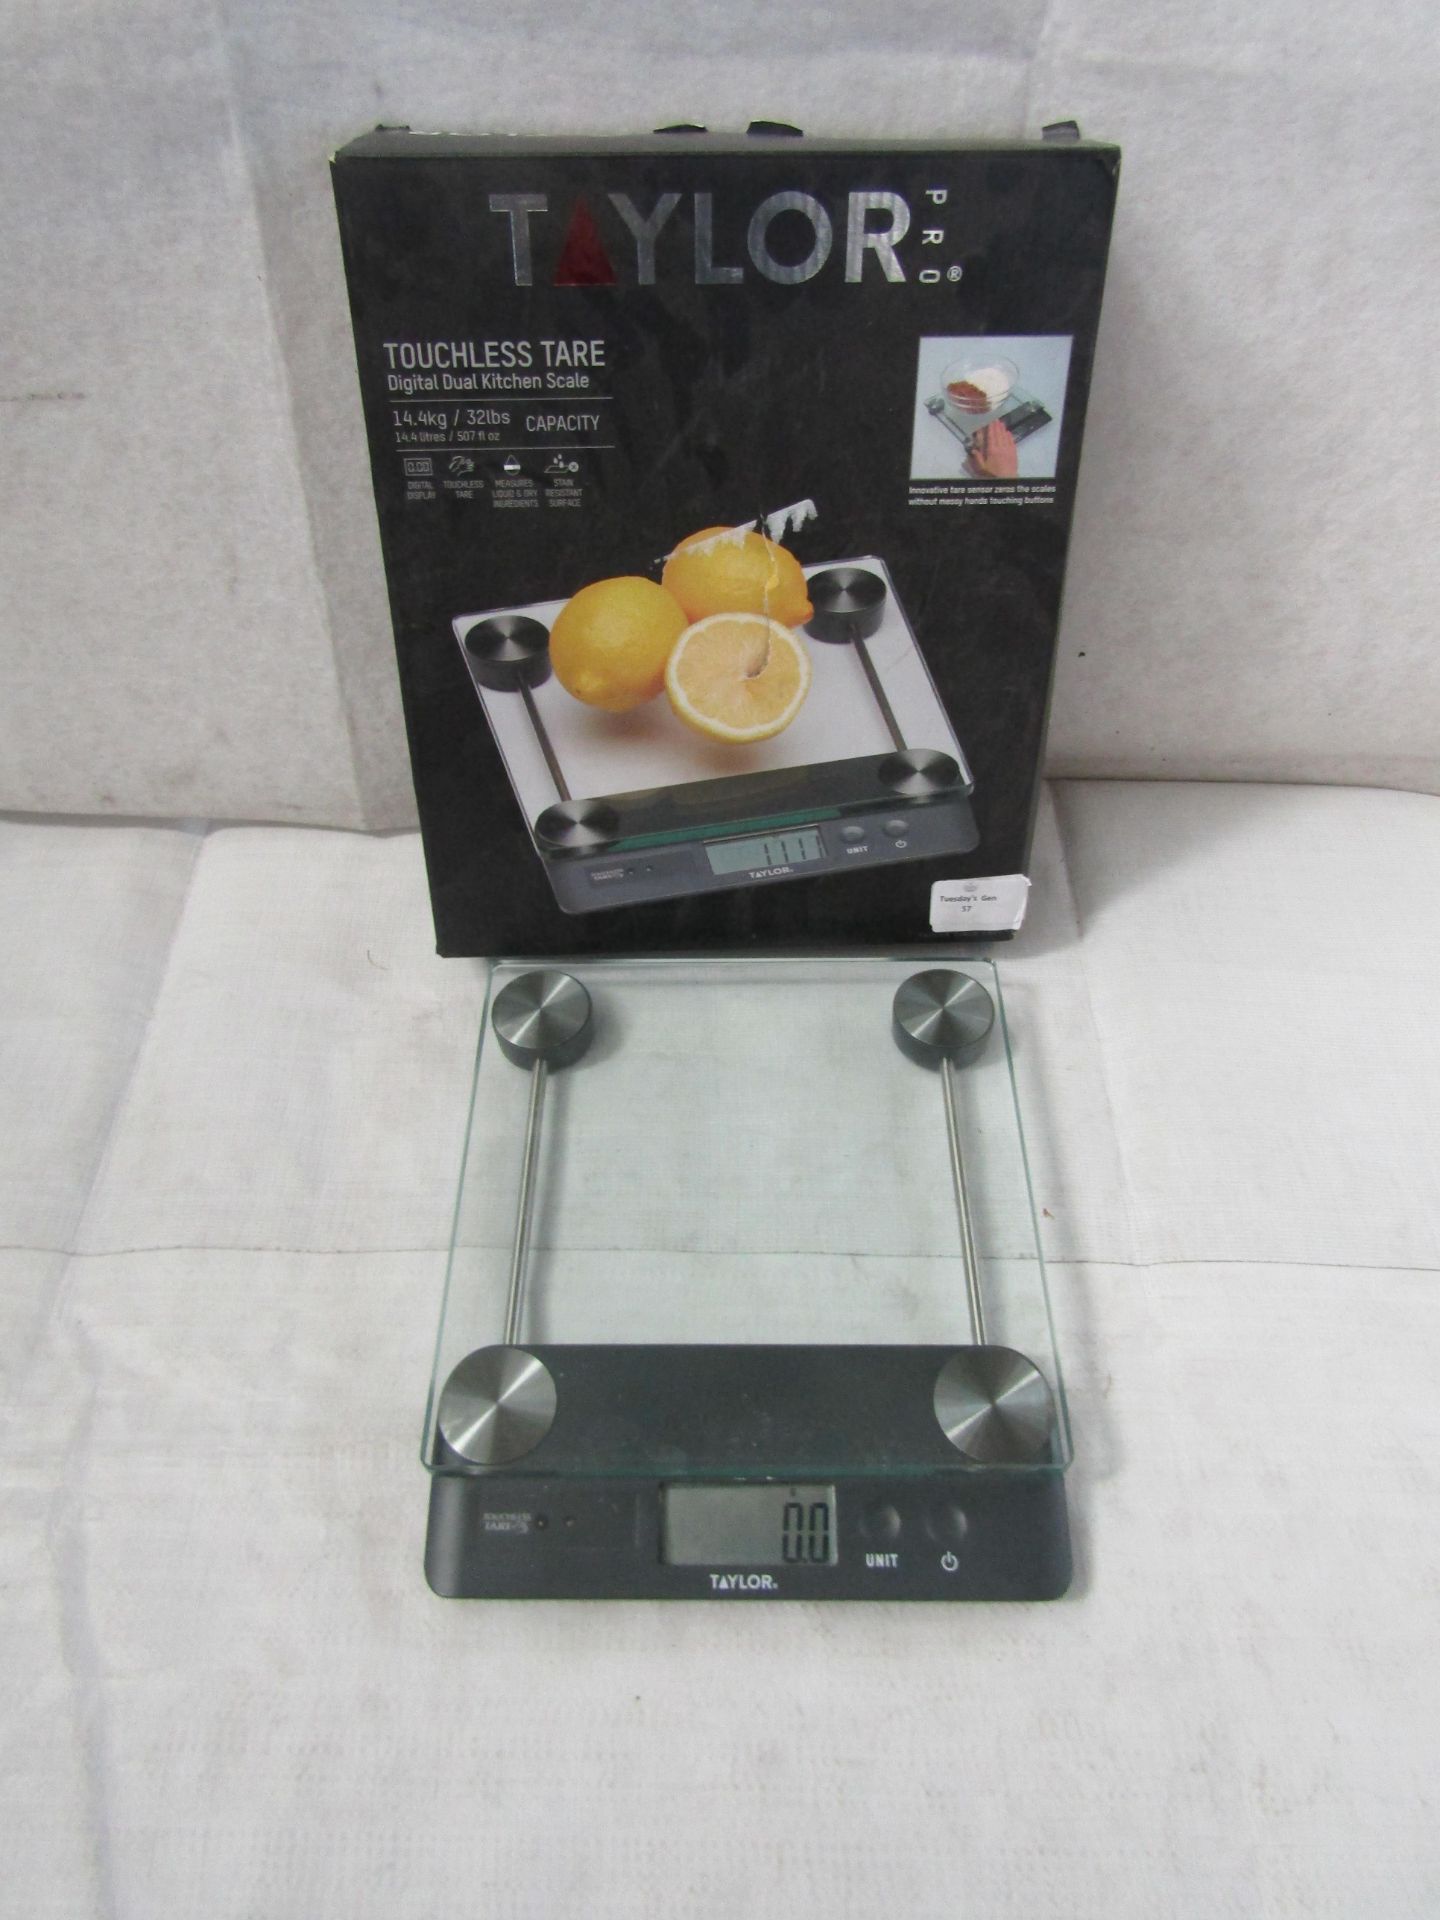 Taylor Pro - Touchless Tare Digital Dual Kitchen Scale - Good Condition, Powers On & Boxed.